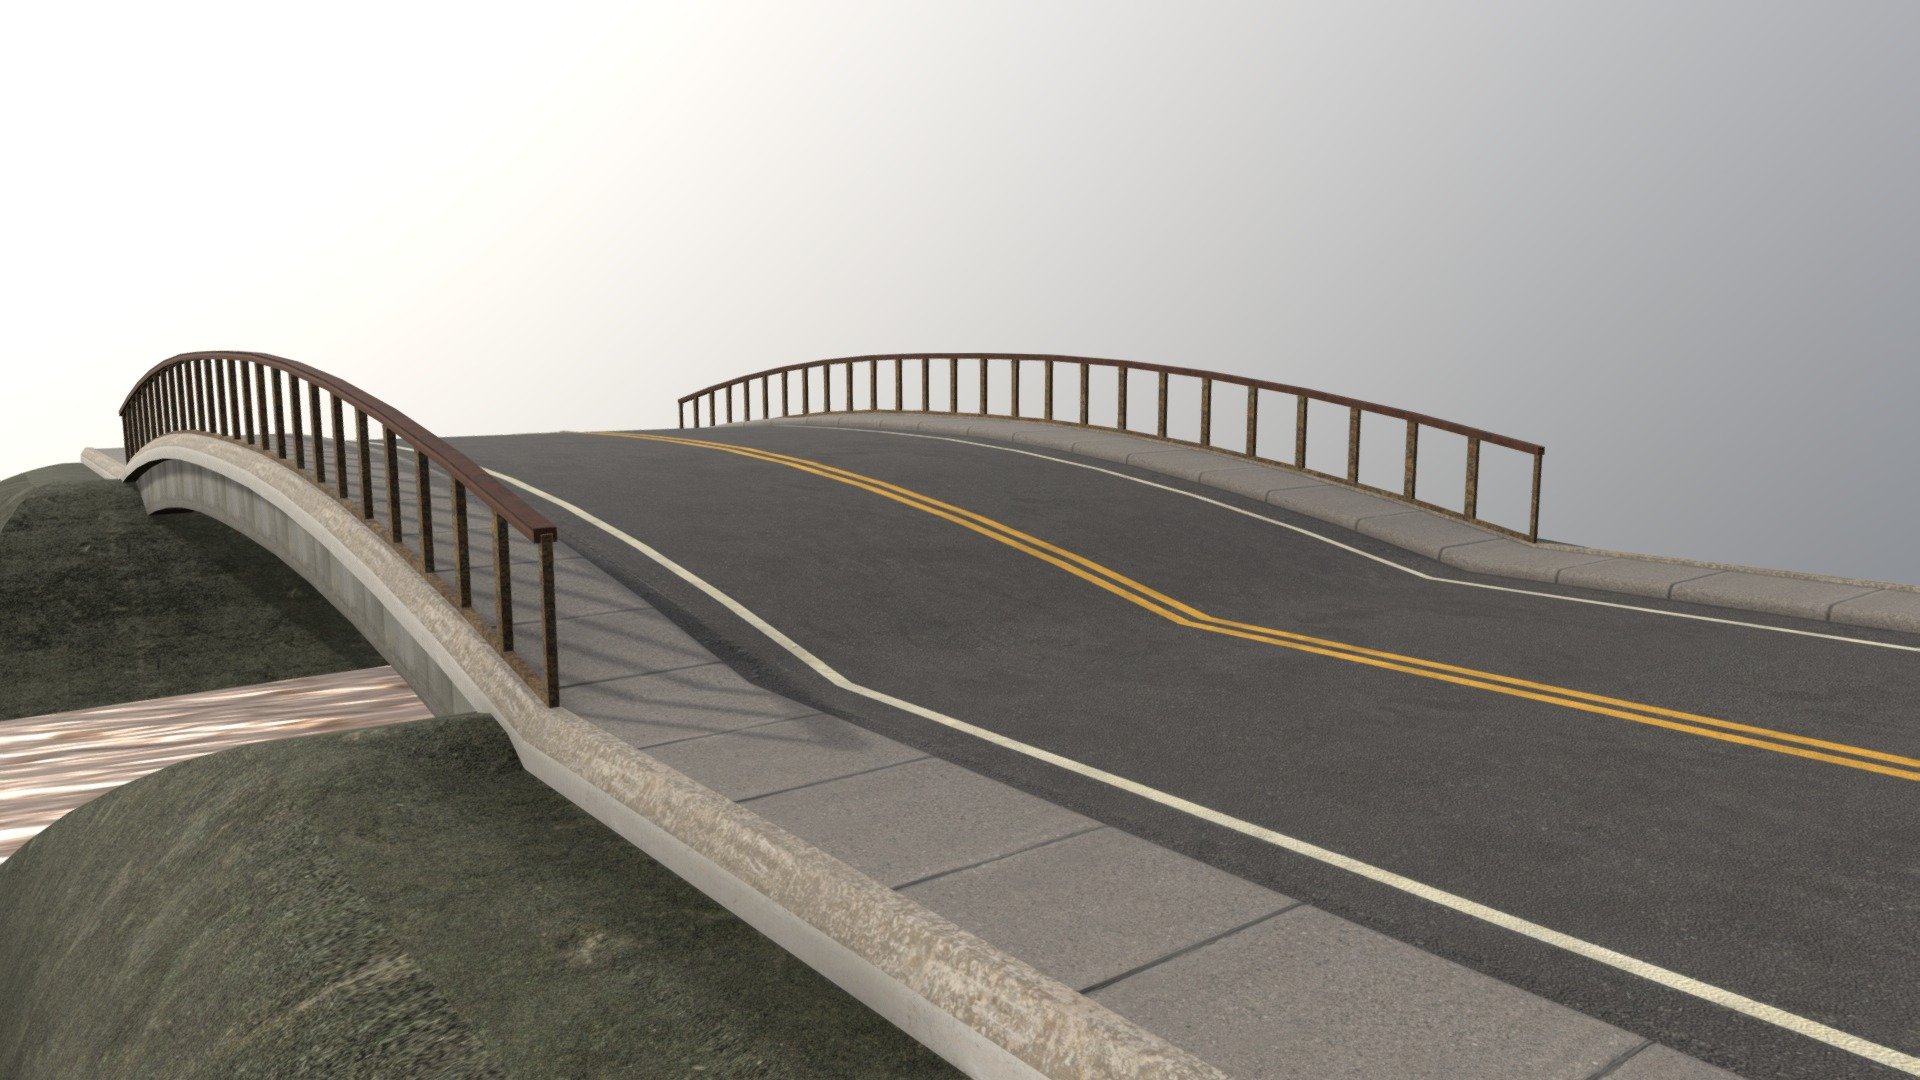 American Road Bridge
This model is FREE. If you'd like to make a small donation to me through the PayPal link below, it would be greatly appreciated and give me an incentive to keep making models!

 - American Road Bridge - Download Free 3D model by jimbogies 3d model